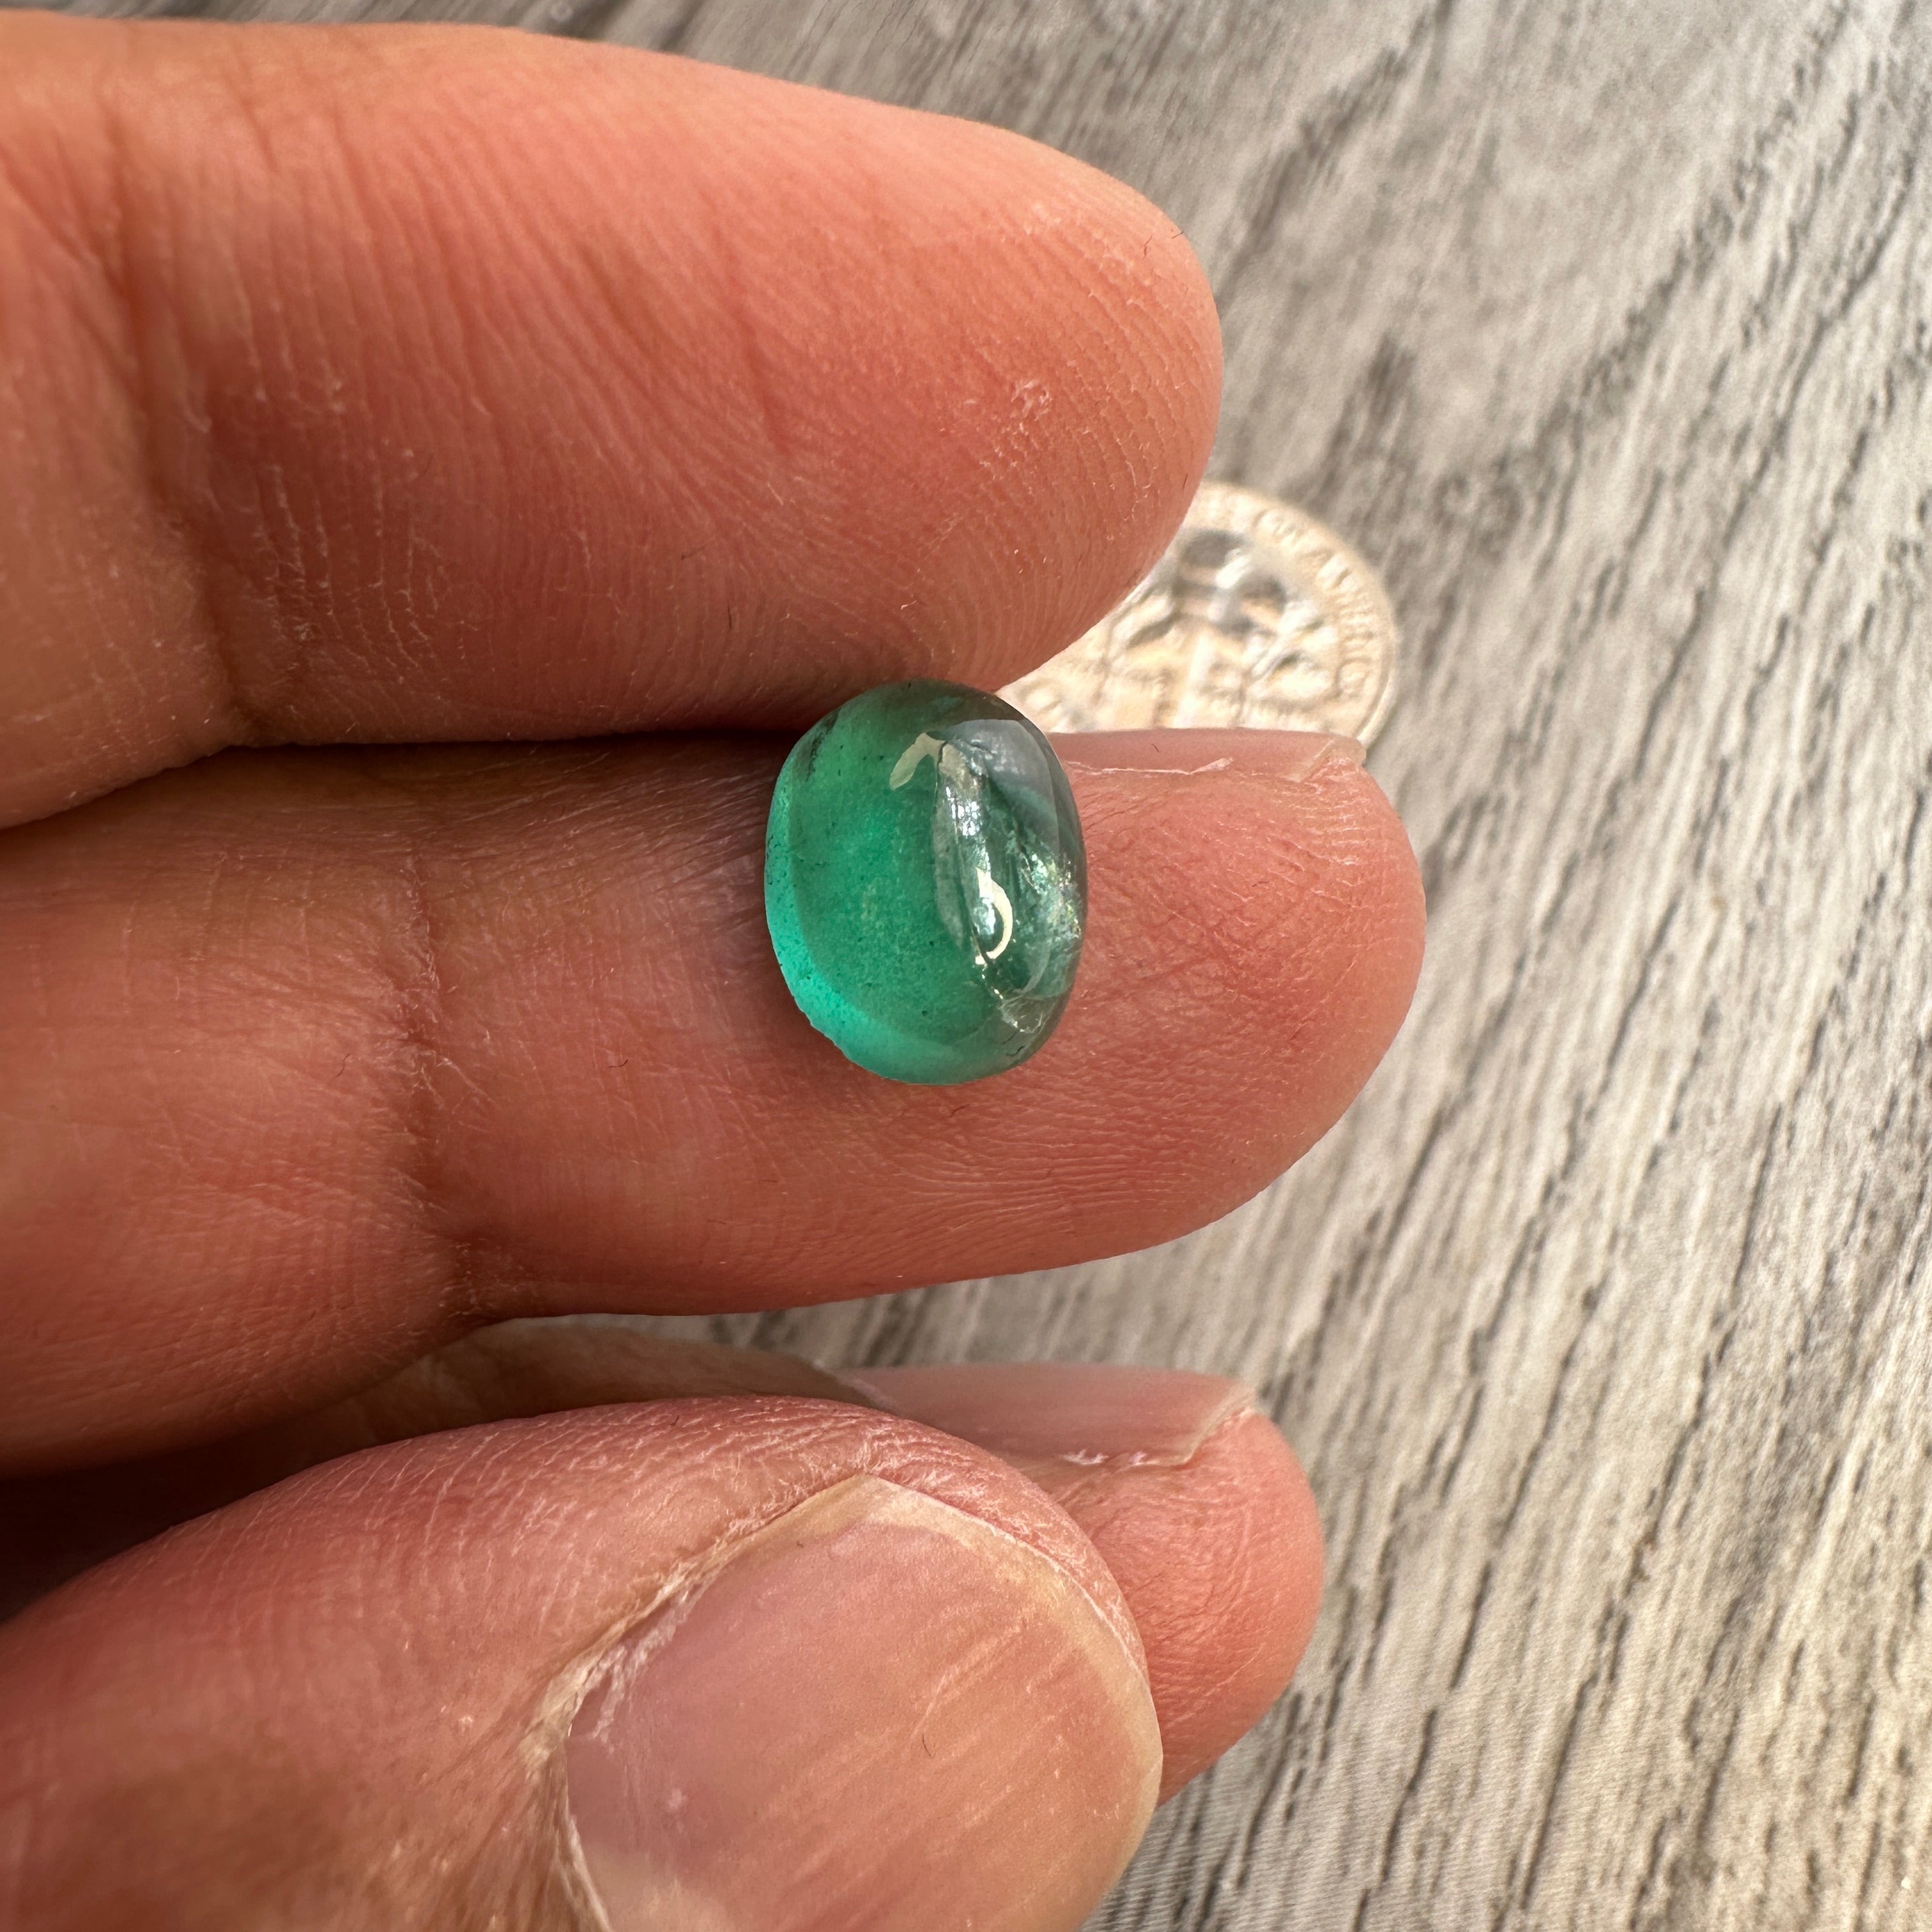 1.99ct Emerald, Tanzania, No Oil, Untreated Unheated. Internal fracture that would have normally been hidden with oil